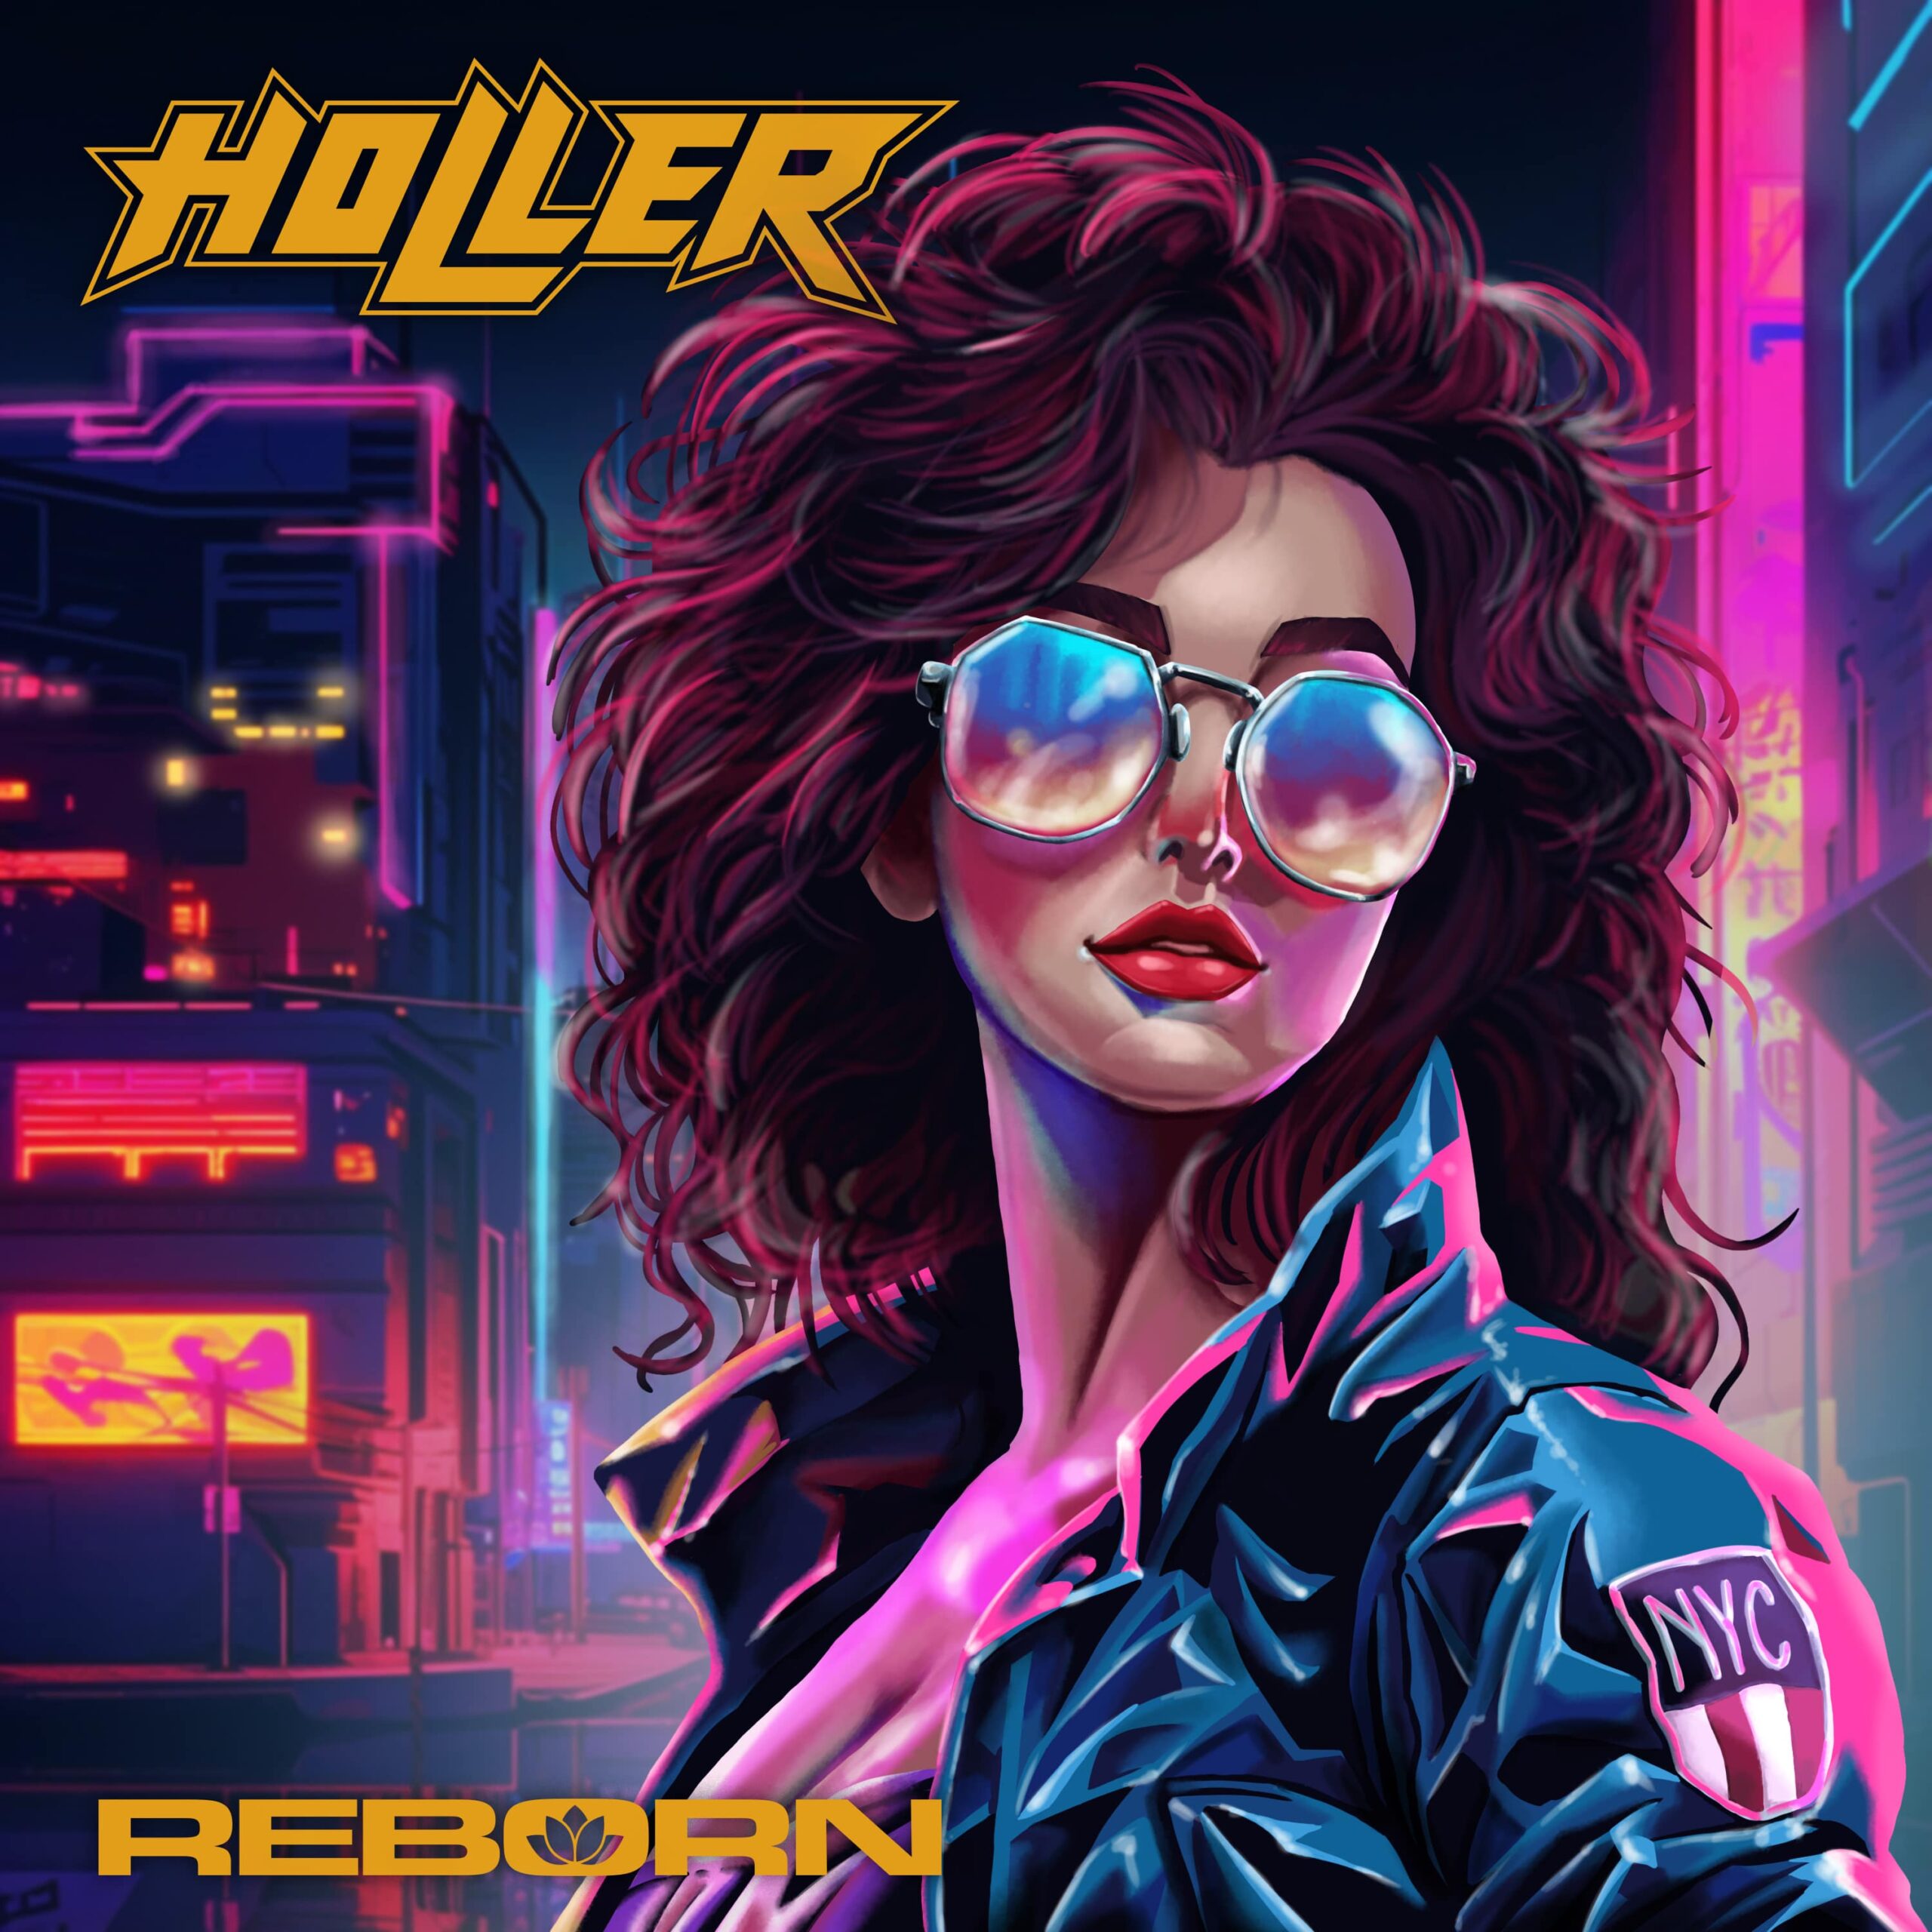 Holler releases “Yulia” video